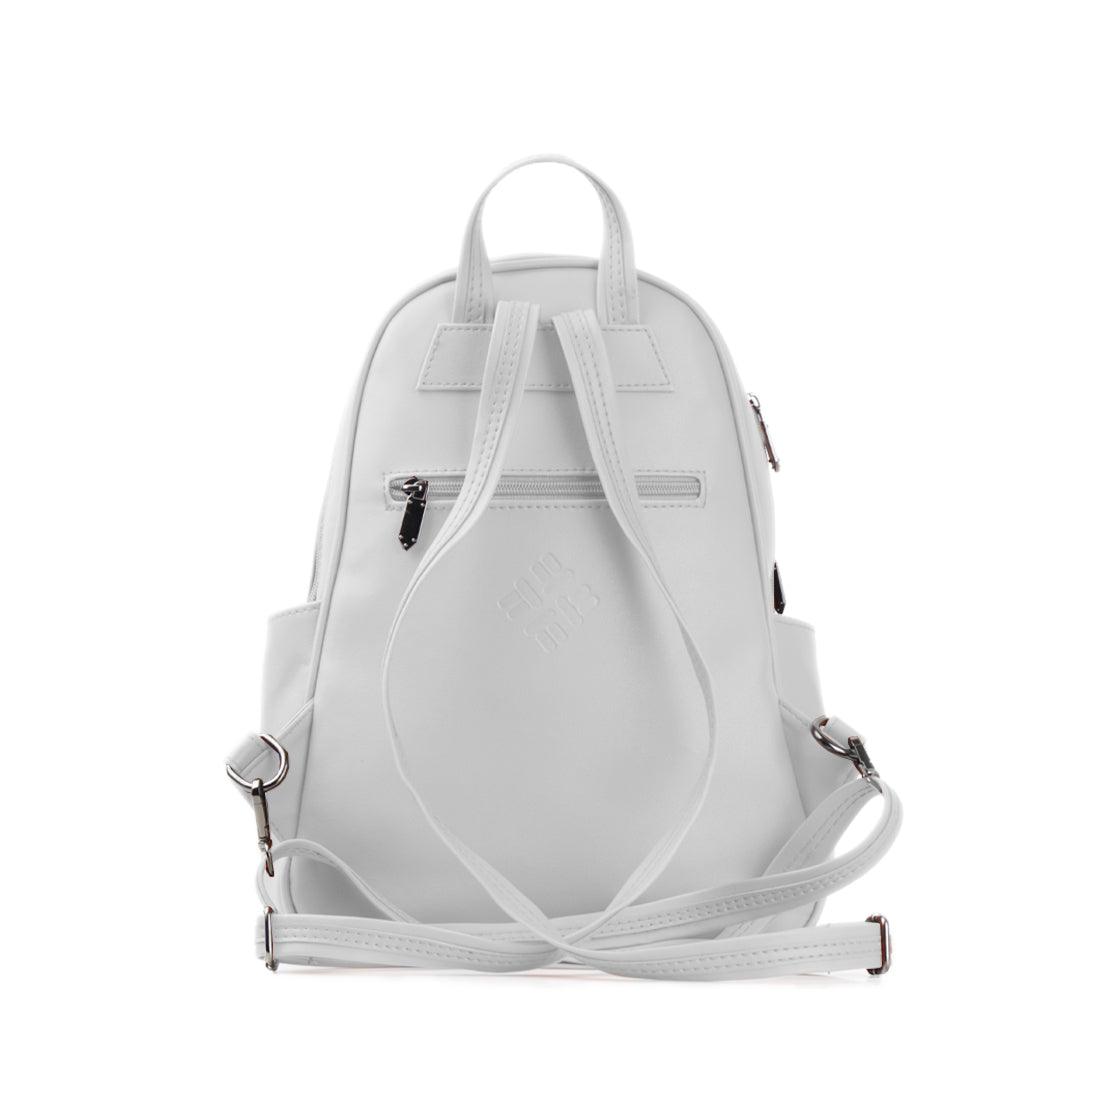 White Vivid Backpack Floral - CANVAEGYPT